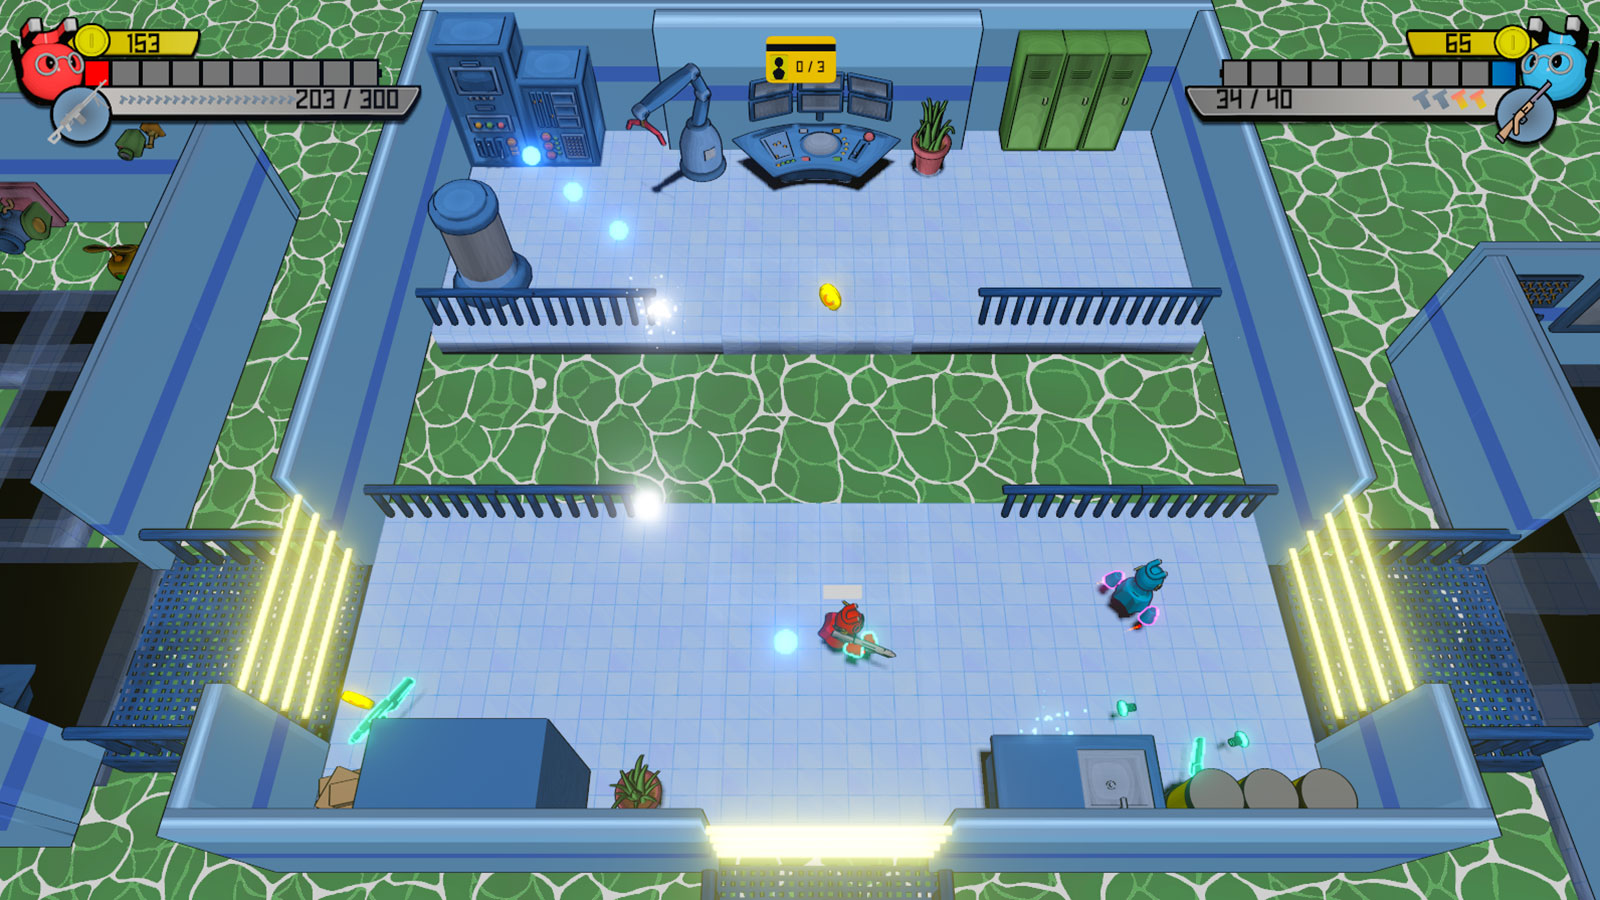 A red robot aims its weapon in a room separated by a channel of green water